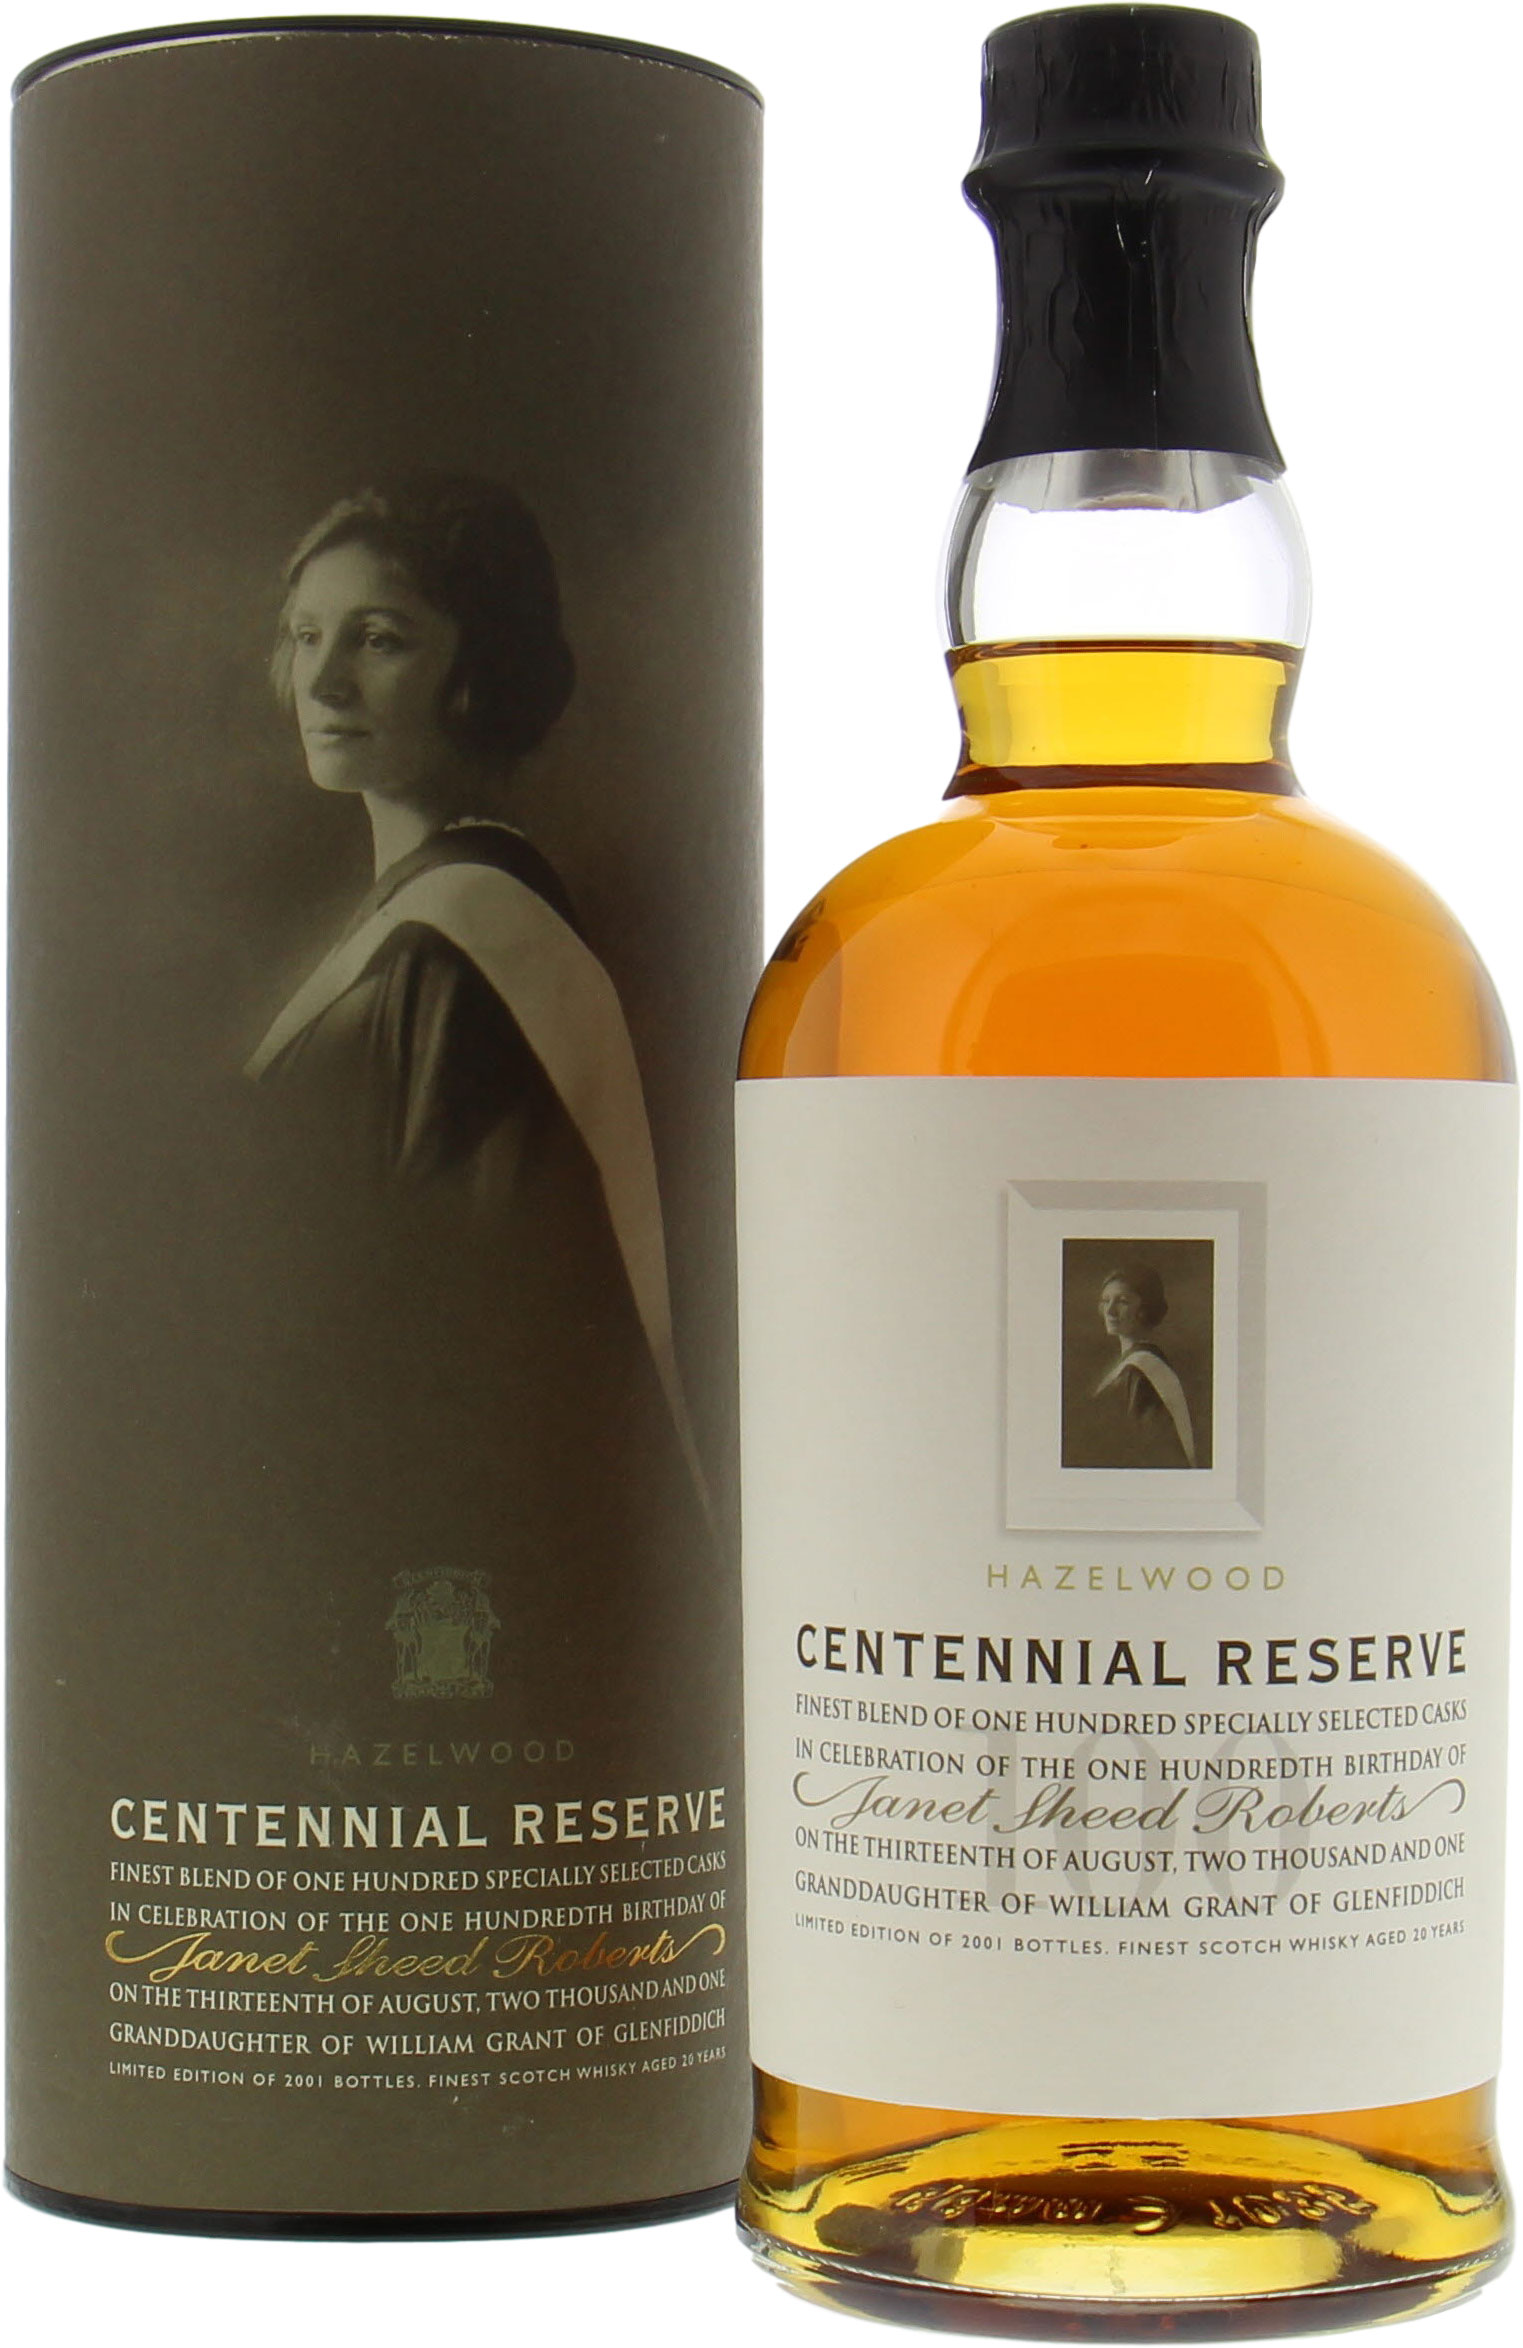 Kininvie - Hazelwood Centennial Reserve 20 Years Old 40% NV In Original Container 10002